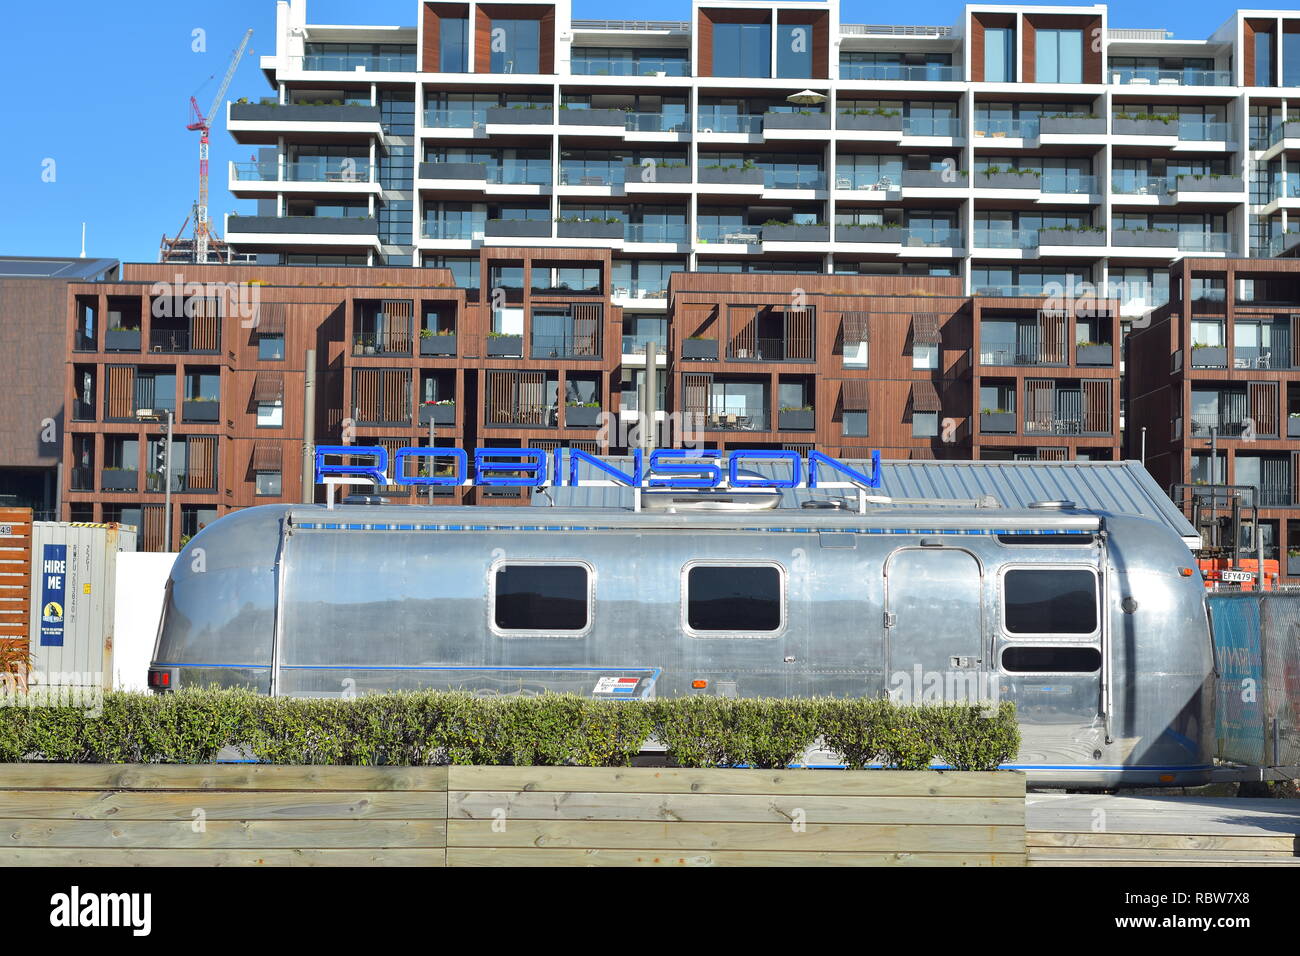 Large shiny polished aluminum caravan with big blue sign on top of it in front of apartment buildings of varying height. Stock Photo